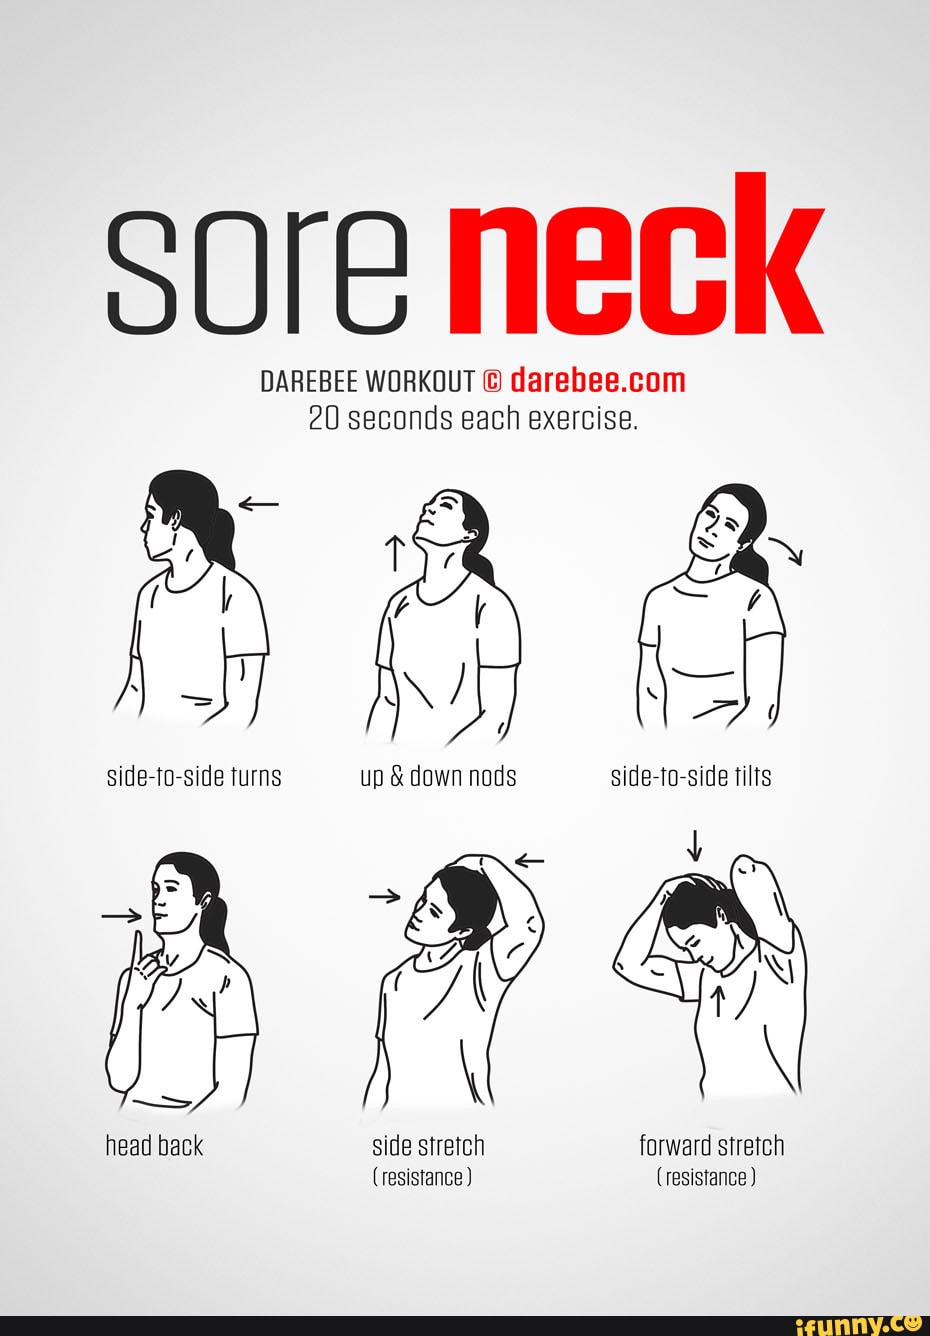 Office workout (not OC) - sore neck DAREBEE WORKOUT 20 seconds each ...